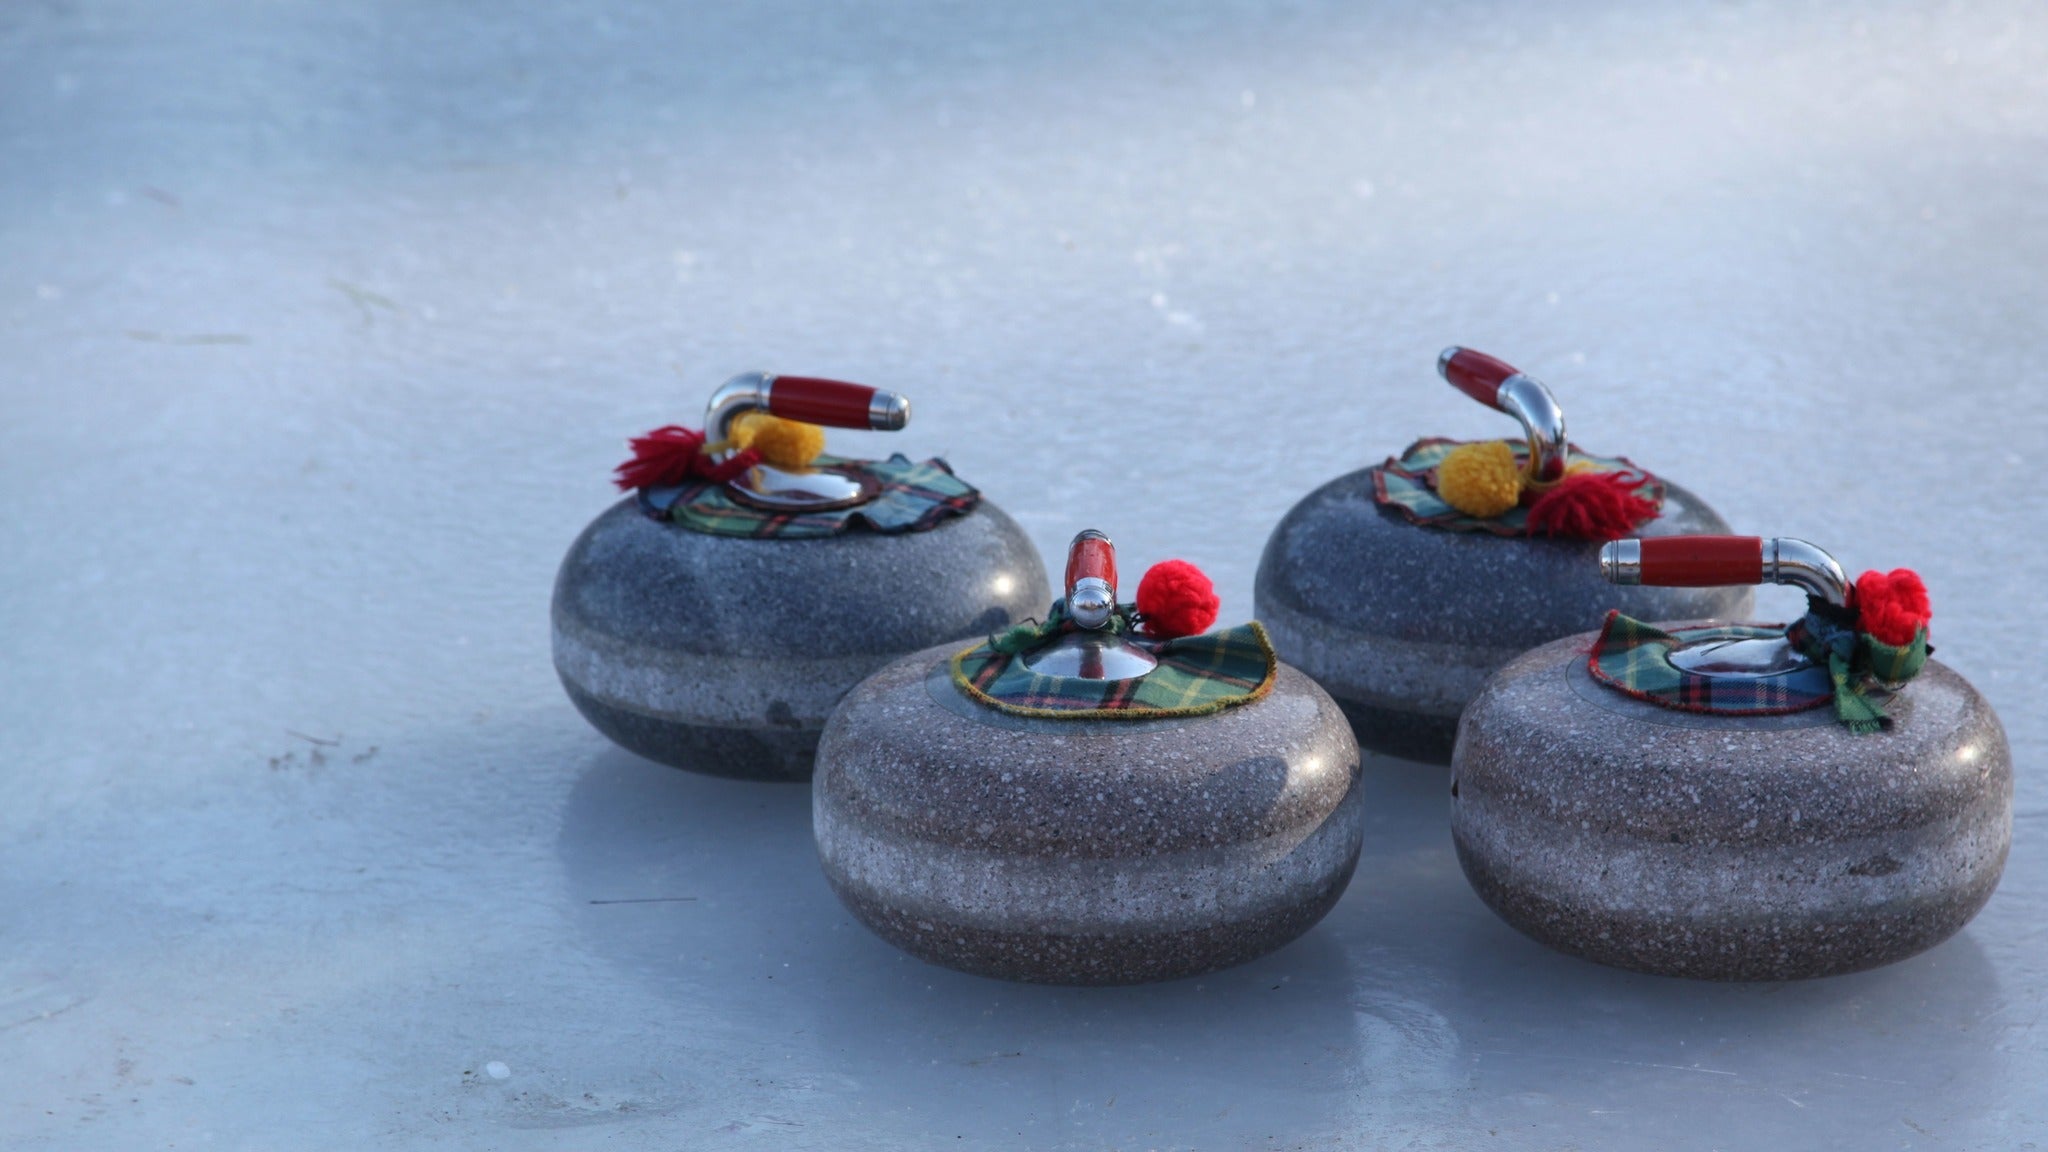 Hotels near Usa Curling National Championship Events